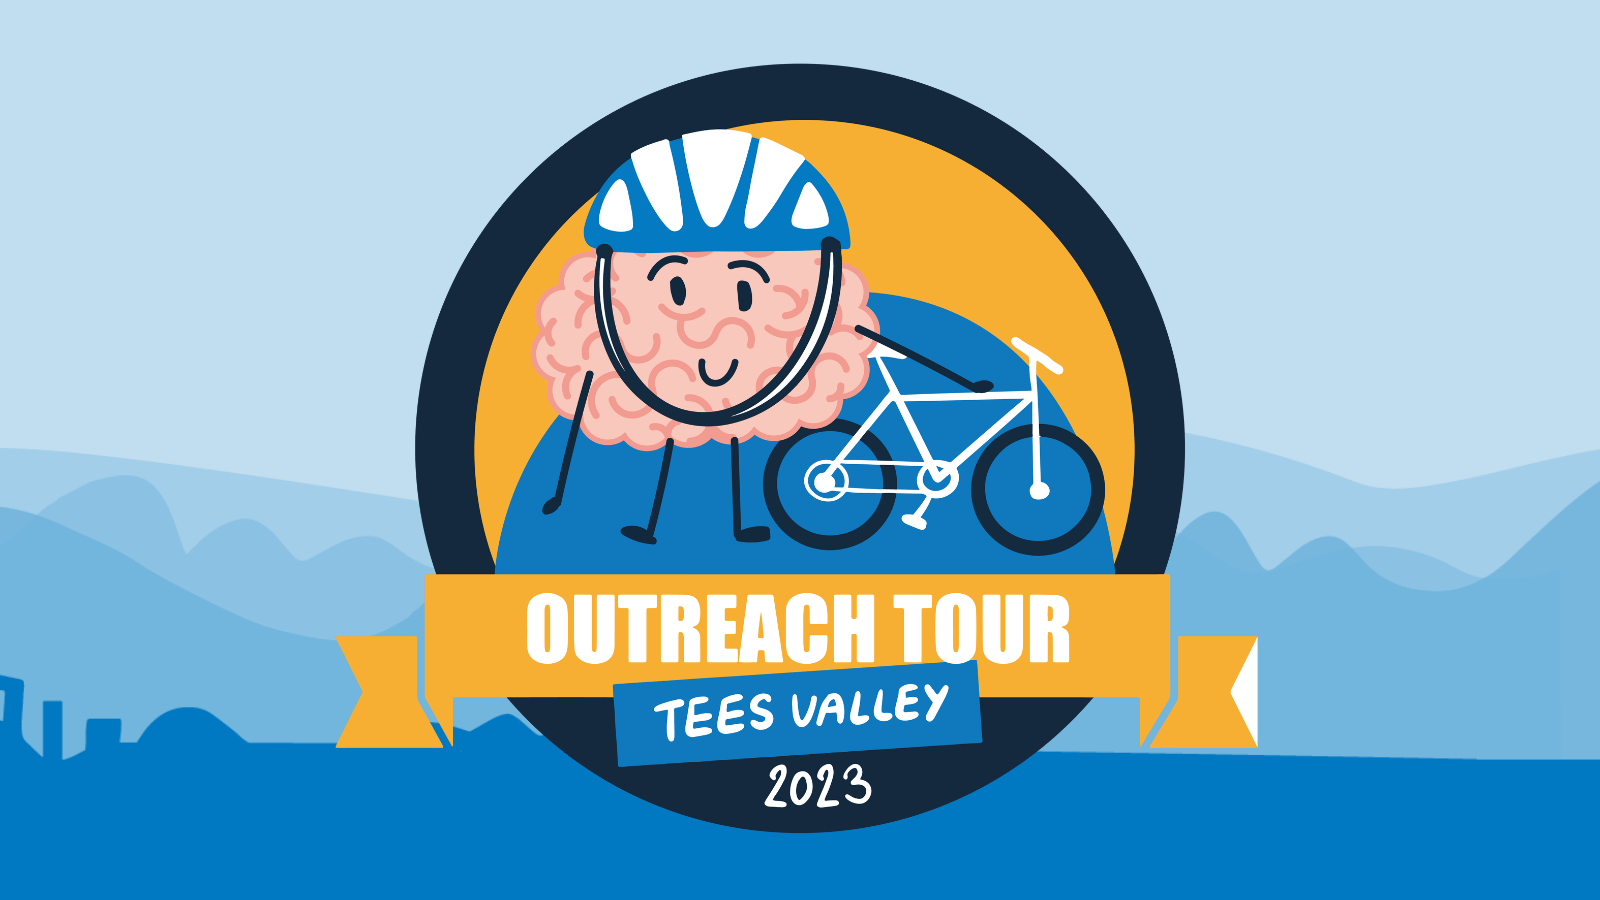 A badge with mascot Brian on a bike. The text reads 'Outreach Tour, Tees Valley 2023'